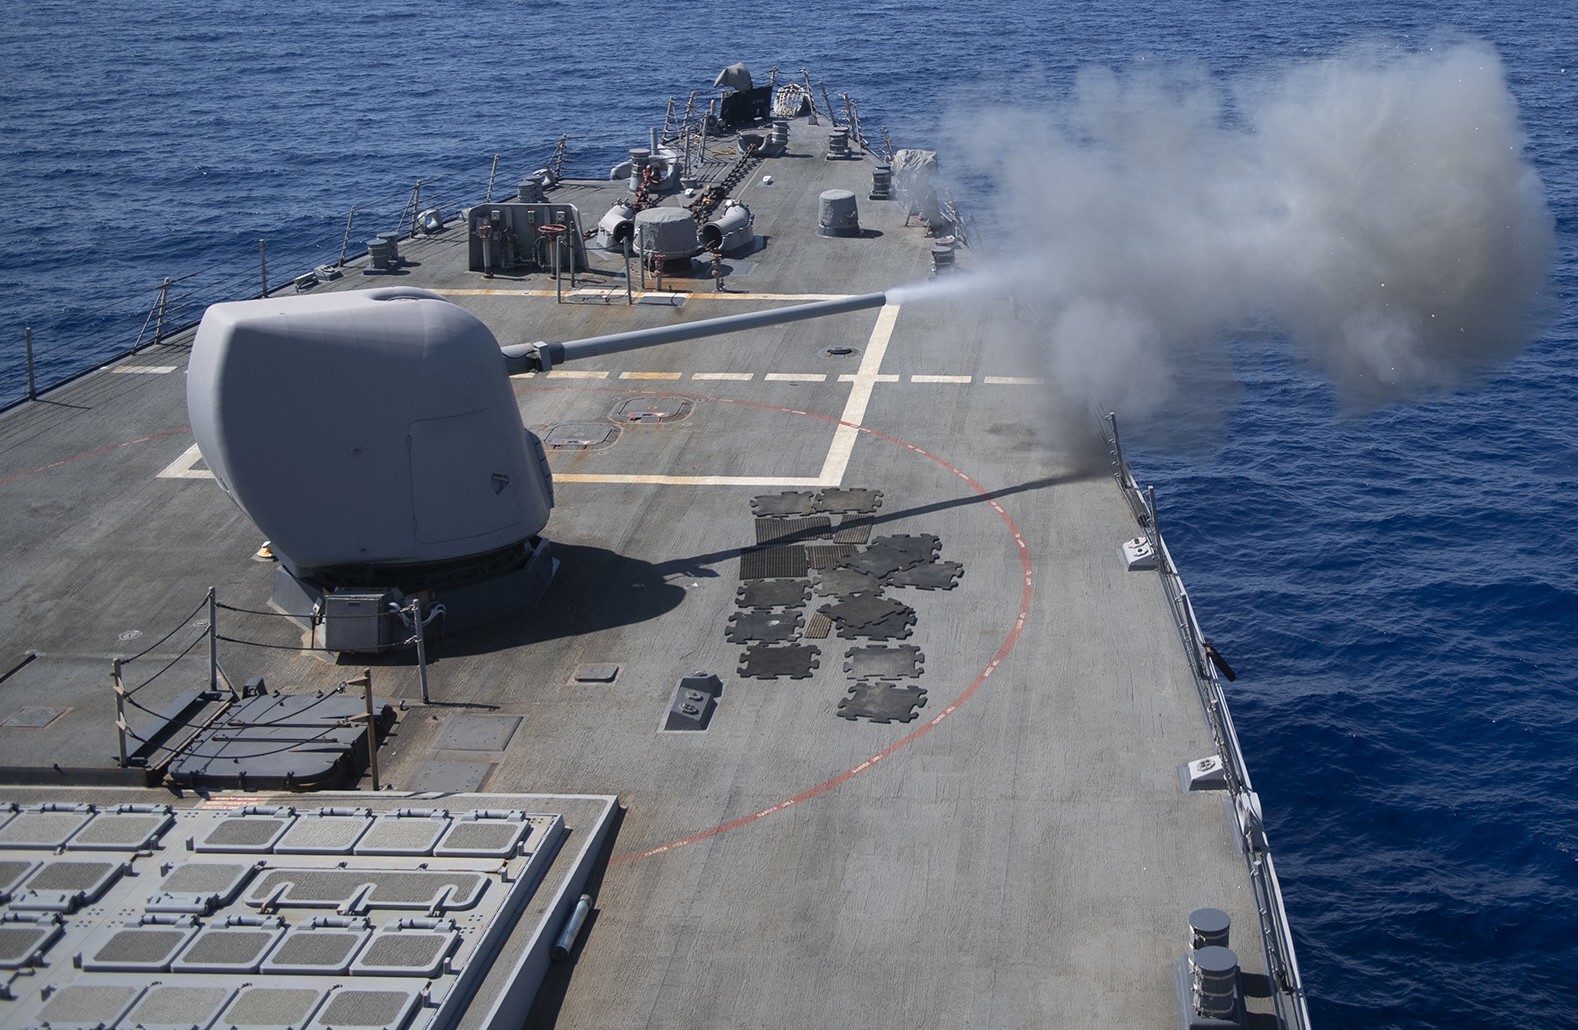 ddg-74 uss mcfaul guided missile destroyer arleigh burke class aegis us navy red sea gun fire 08